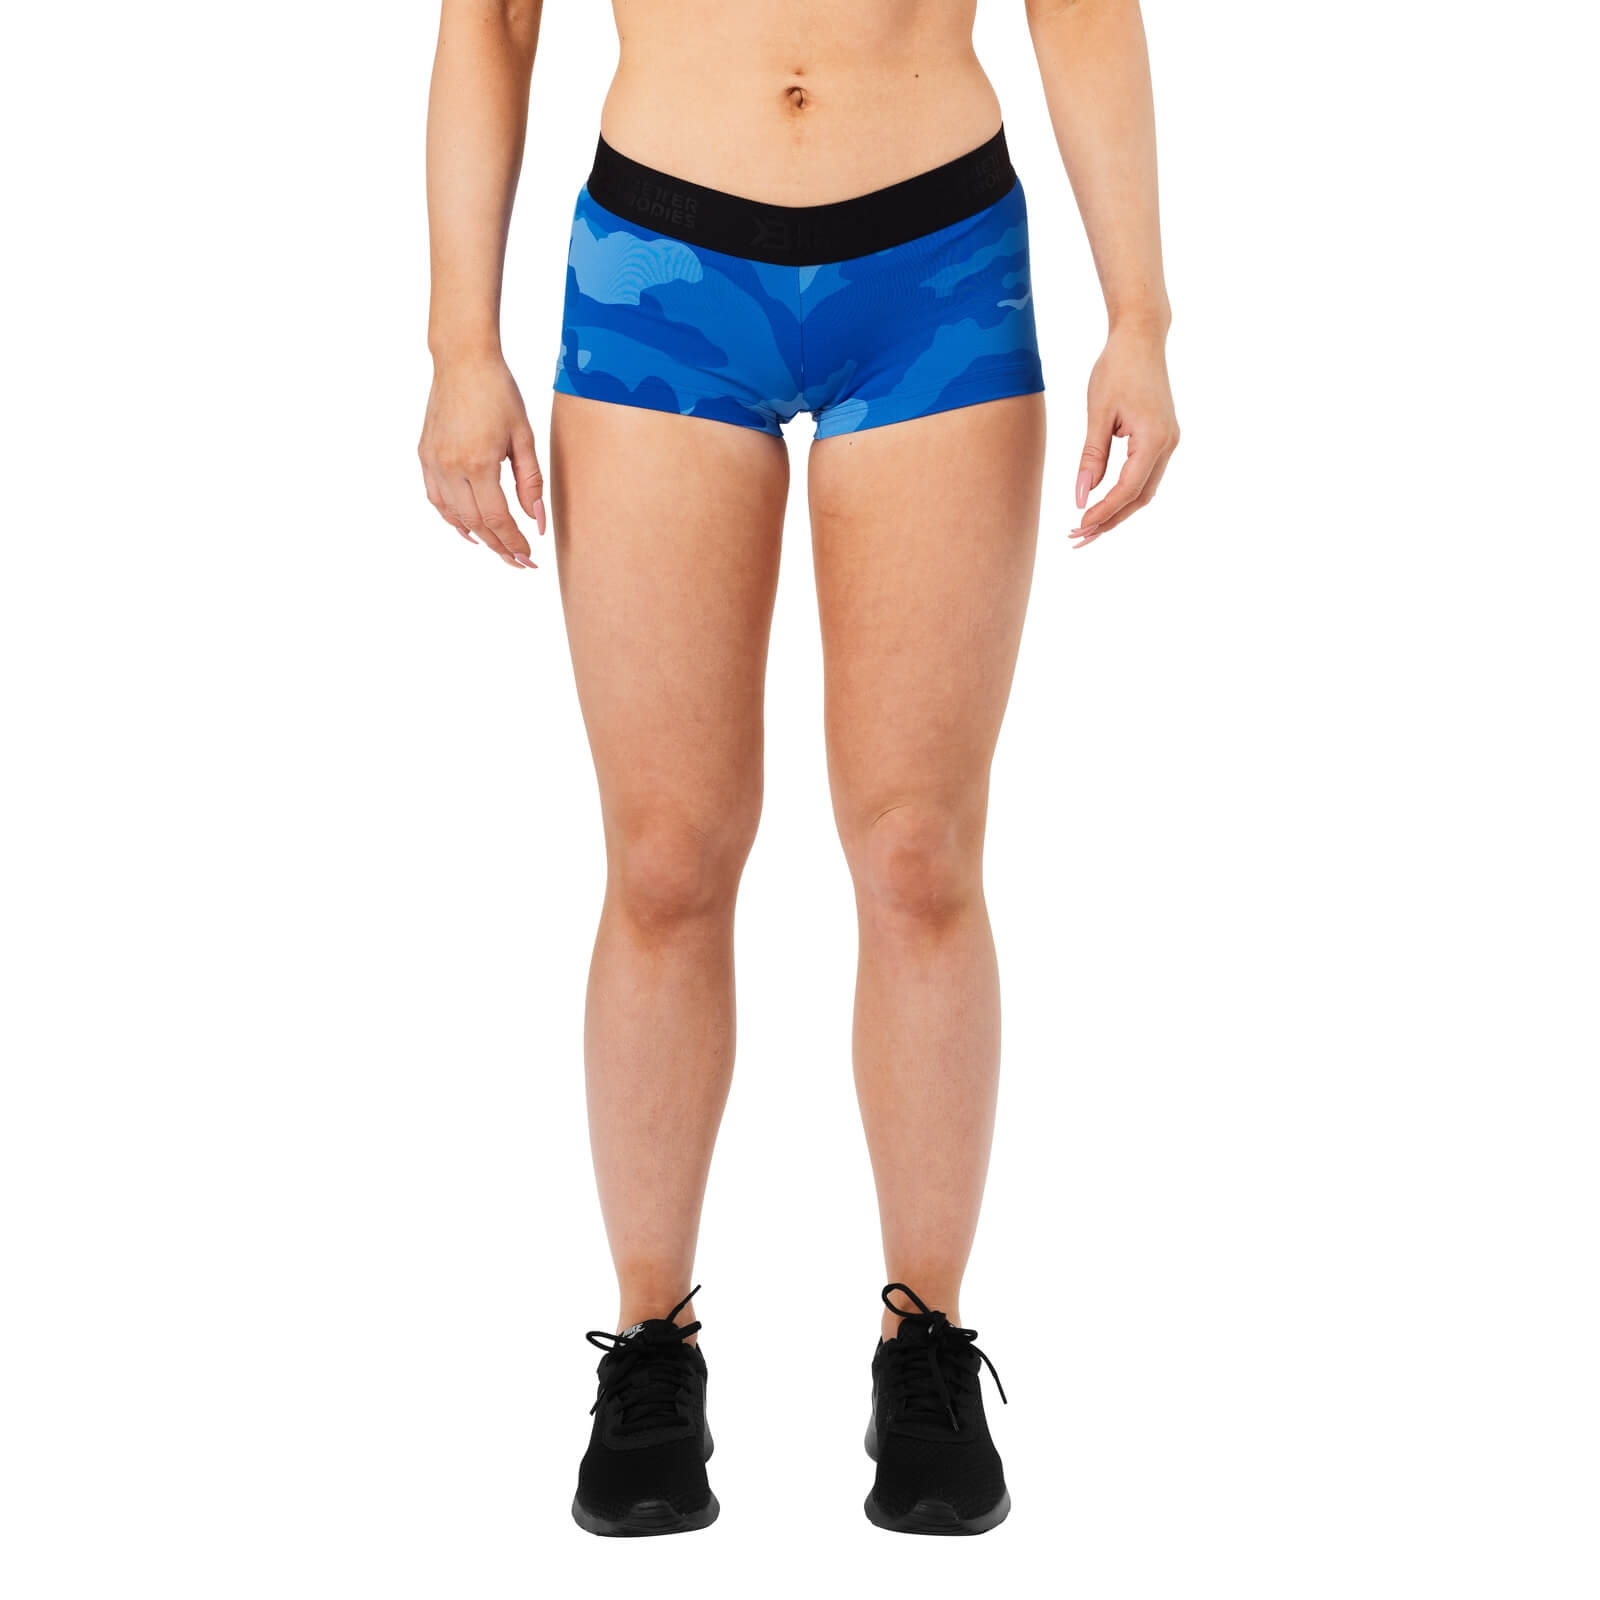 Fitness Hotpant, blue camo, Better Bodies